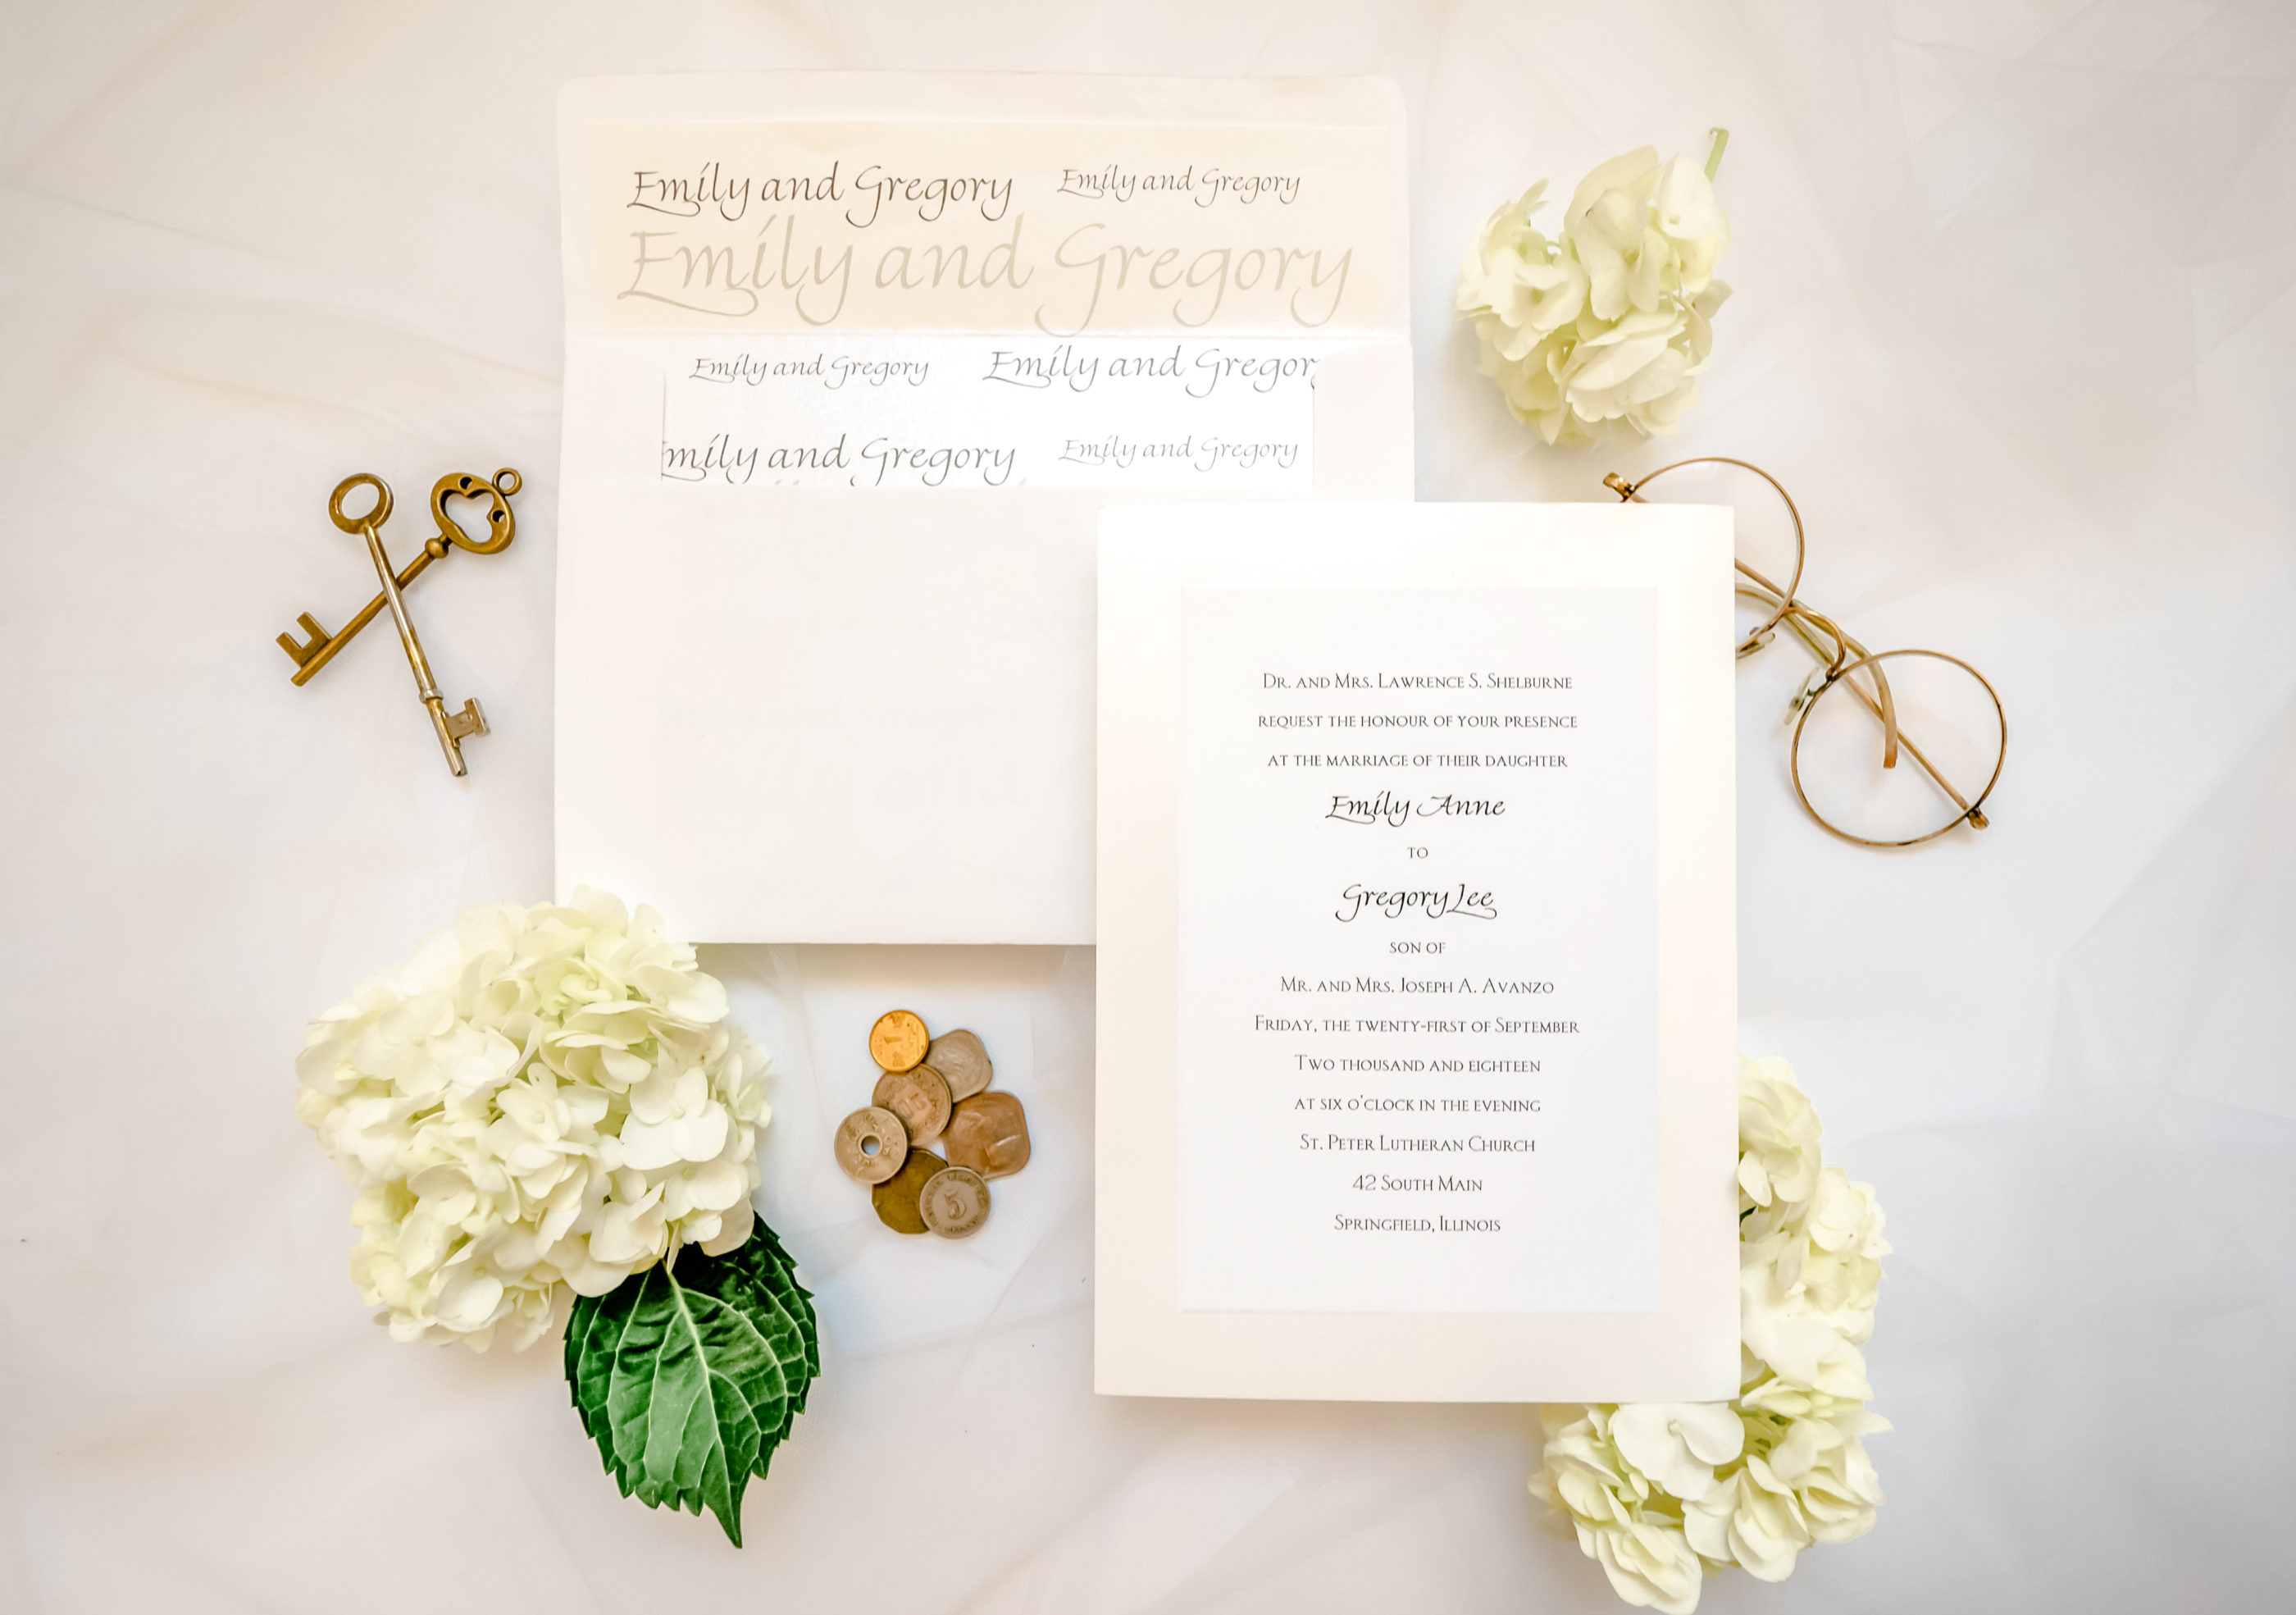 cream colored invitation and envelope with bride and groom's names on inside of envelope